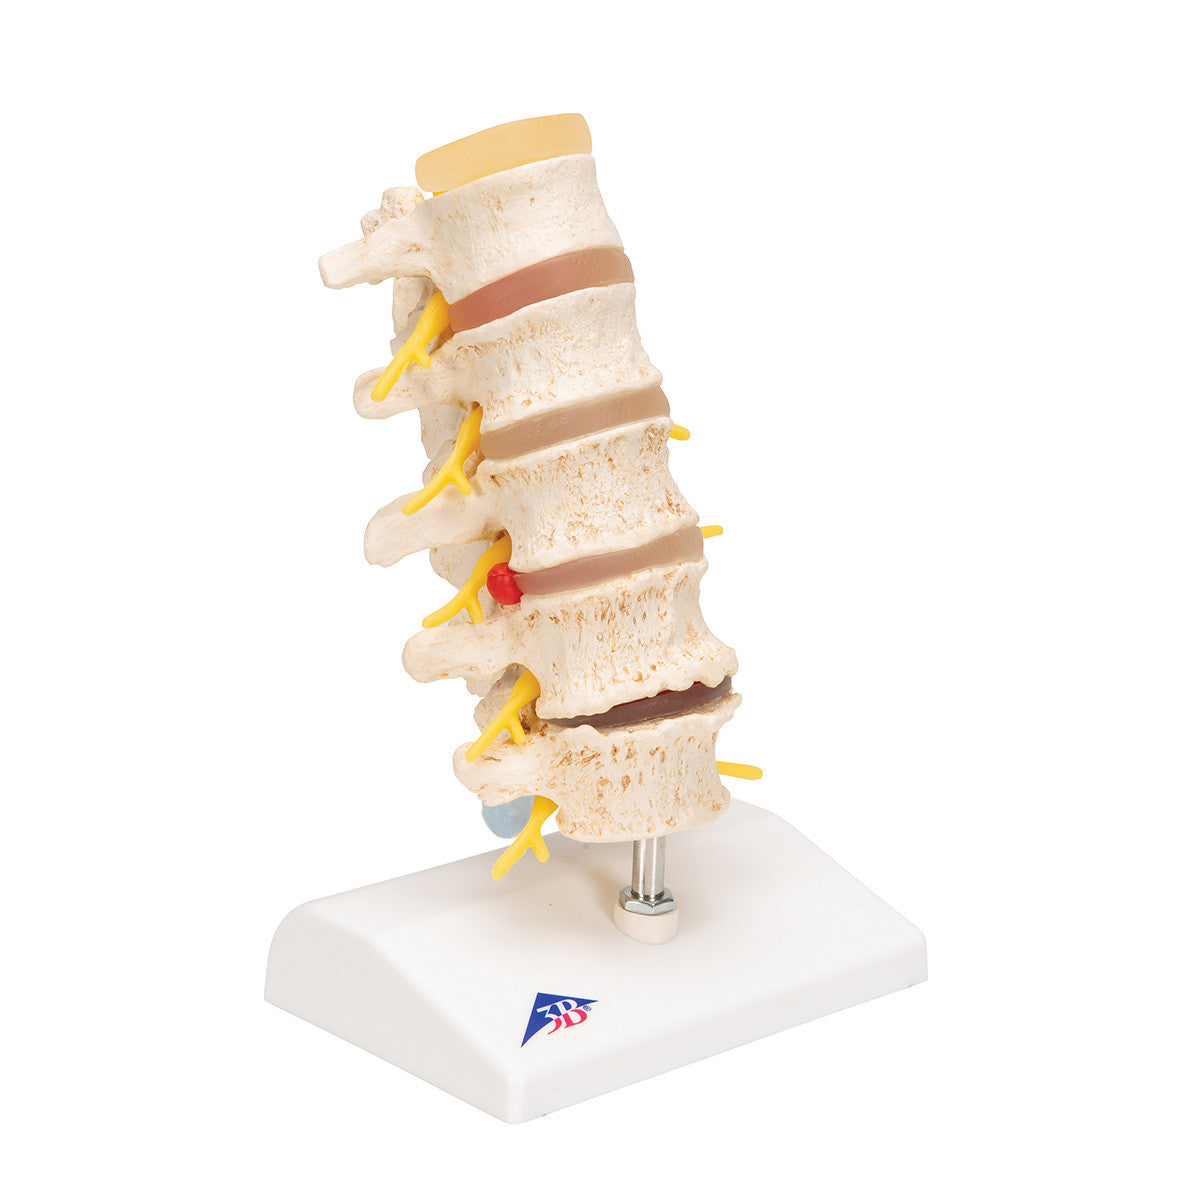 a795_02_1200_1200_stages-of-disc-prolapse-and-vertebral-degeneration-3b-smart-anatomy__80698.1589753277.1280.1280.jpg